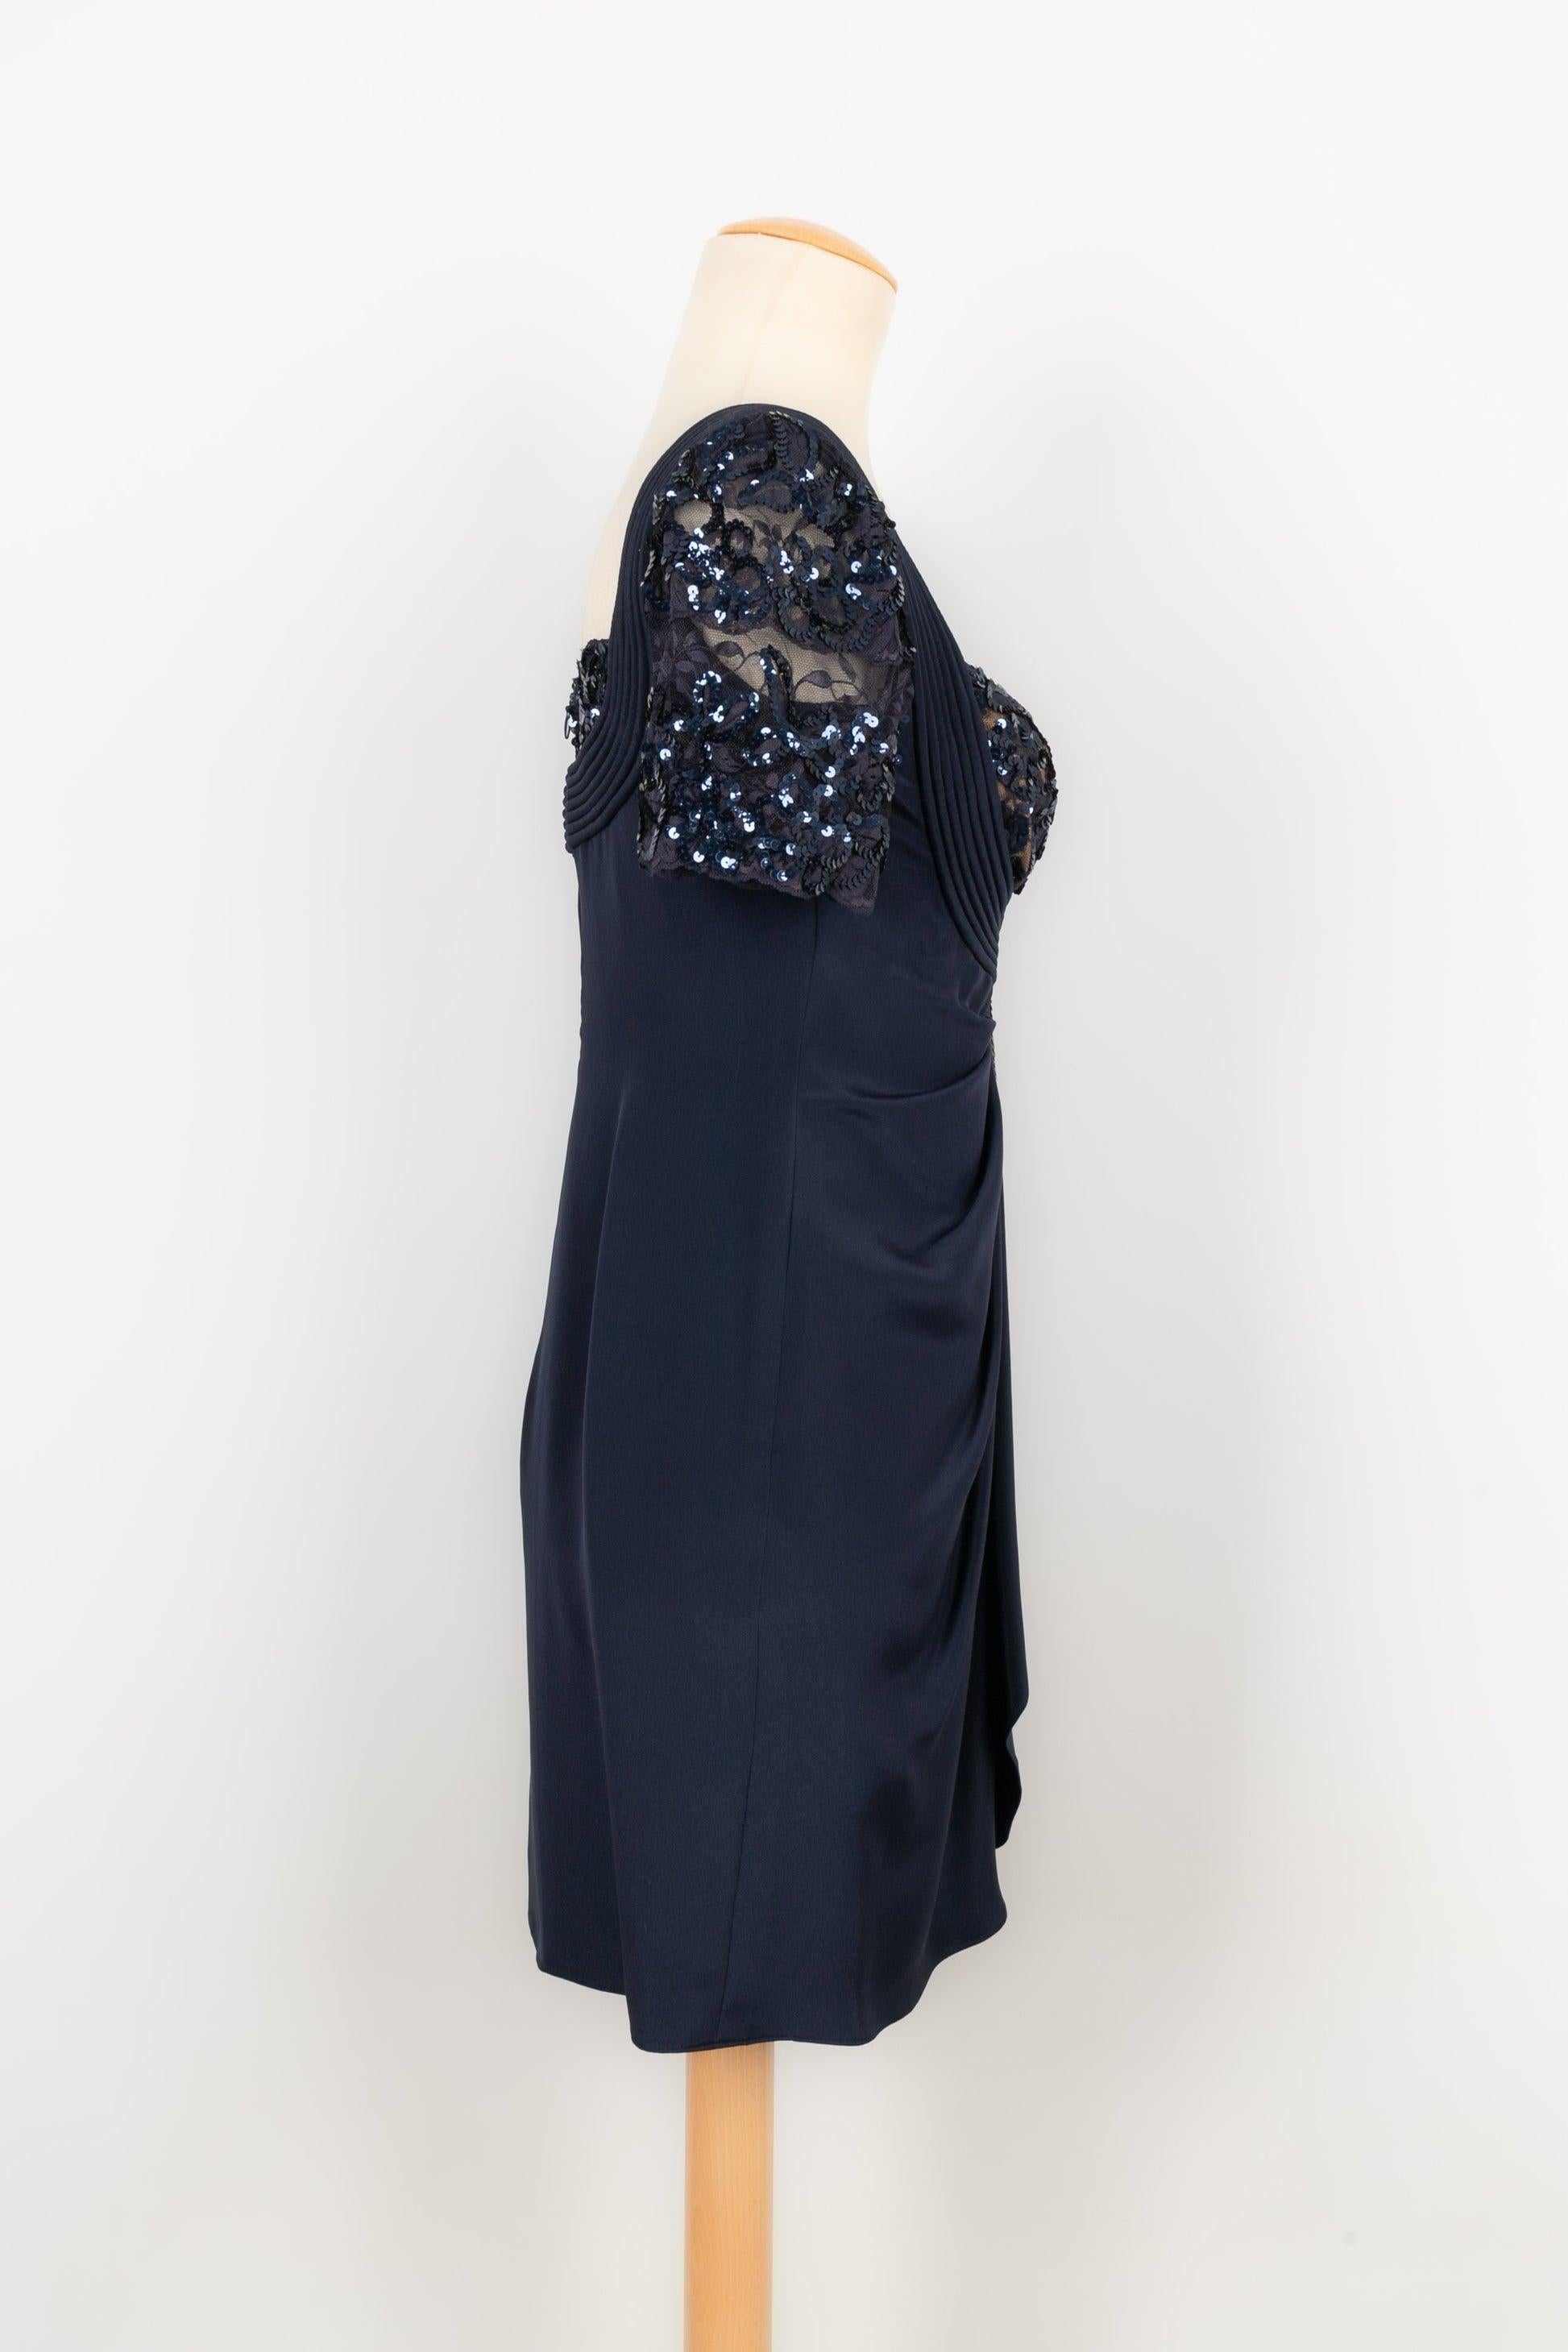 Azzaro - (Made in France) Midnight blue evening dress in taffeta, lace and sequins. No size nor composition label, it fits a 36FR/38FR.

Additional information:
Condition: Very good condition
Dimensions: Chest: 42 cm - Length: 82 cm

Seller